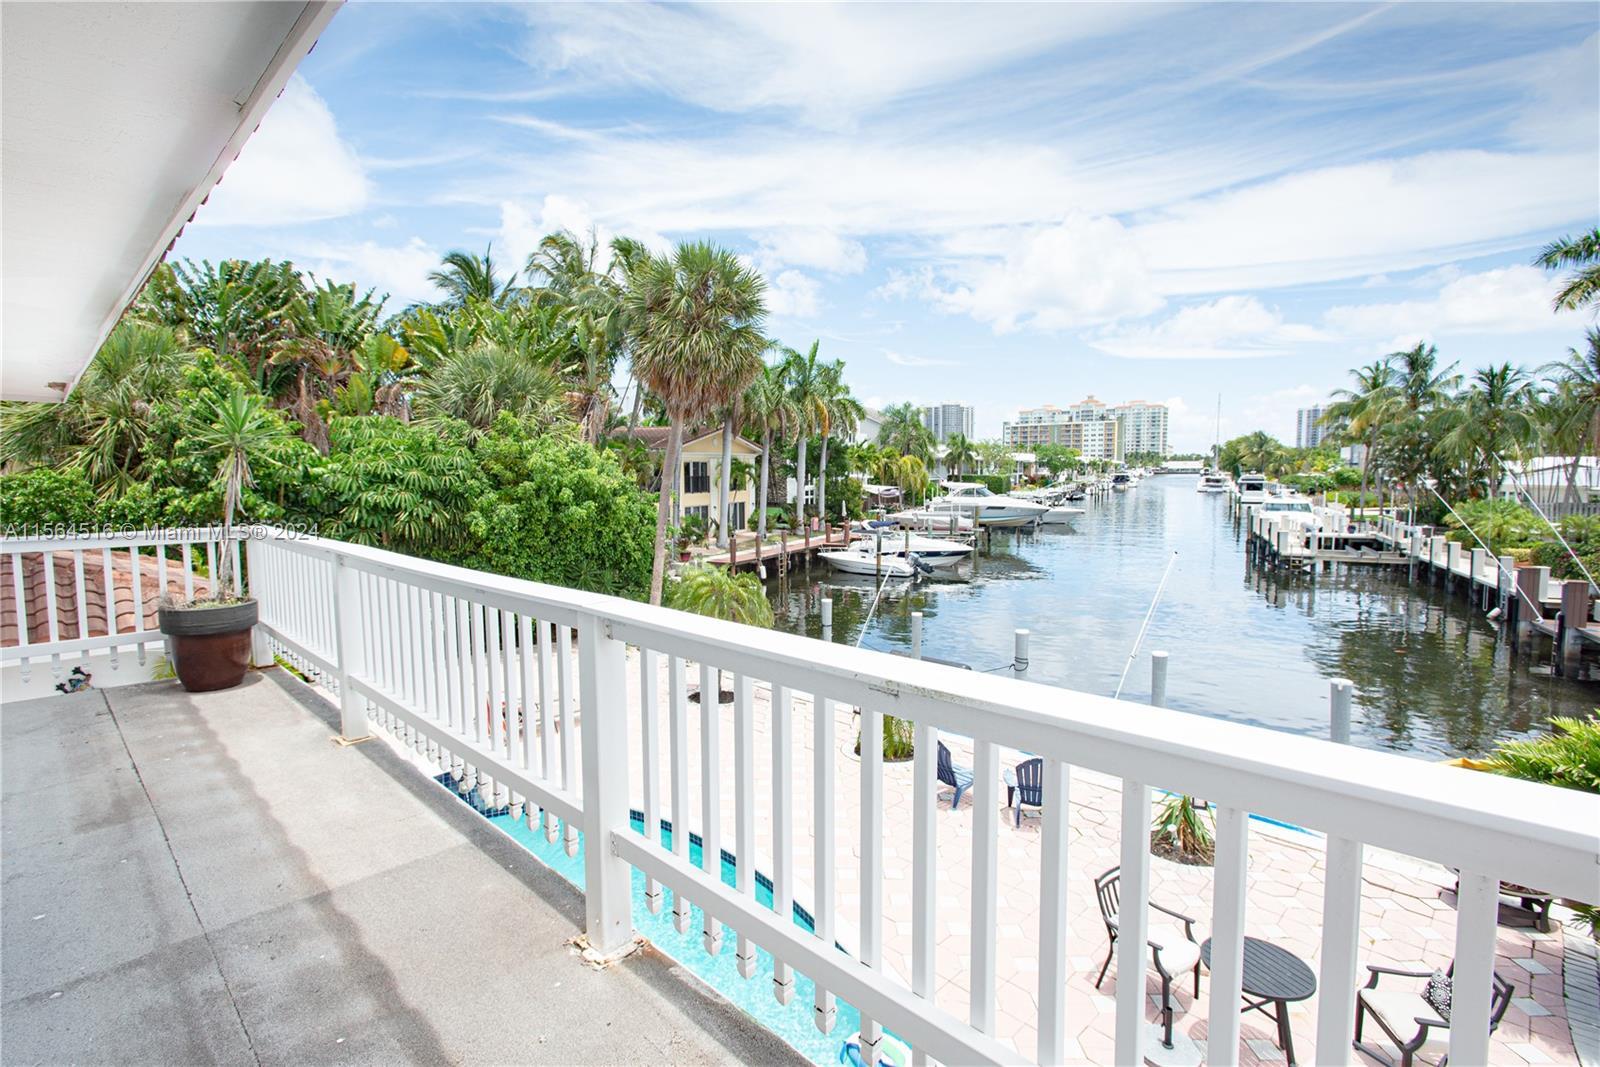 Finally up for sale this amazing property with Large Boat deck place at the end of the canal. Your o